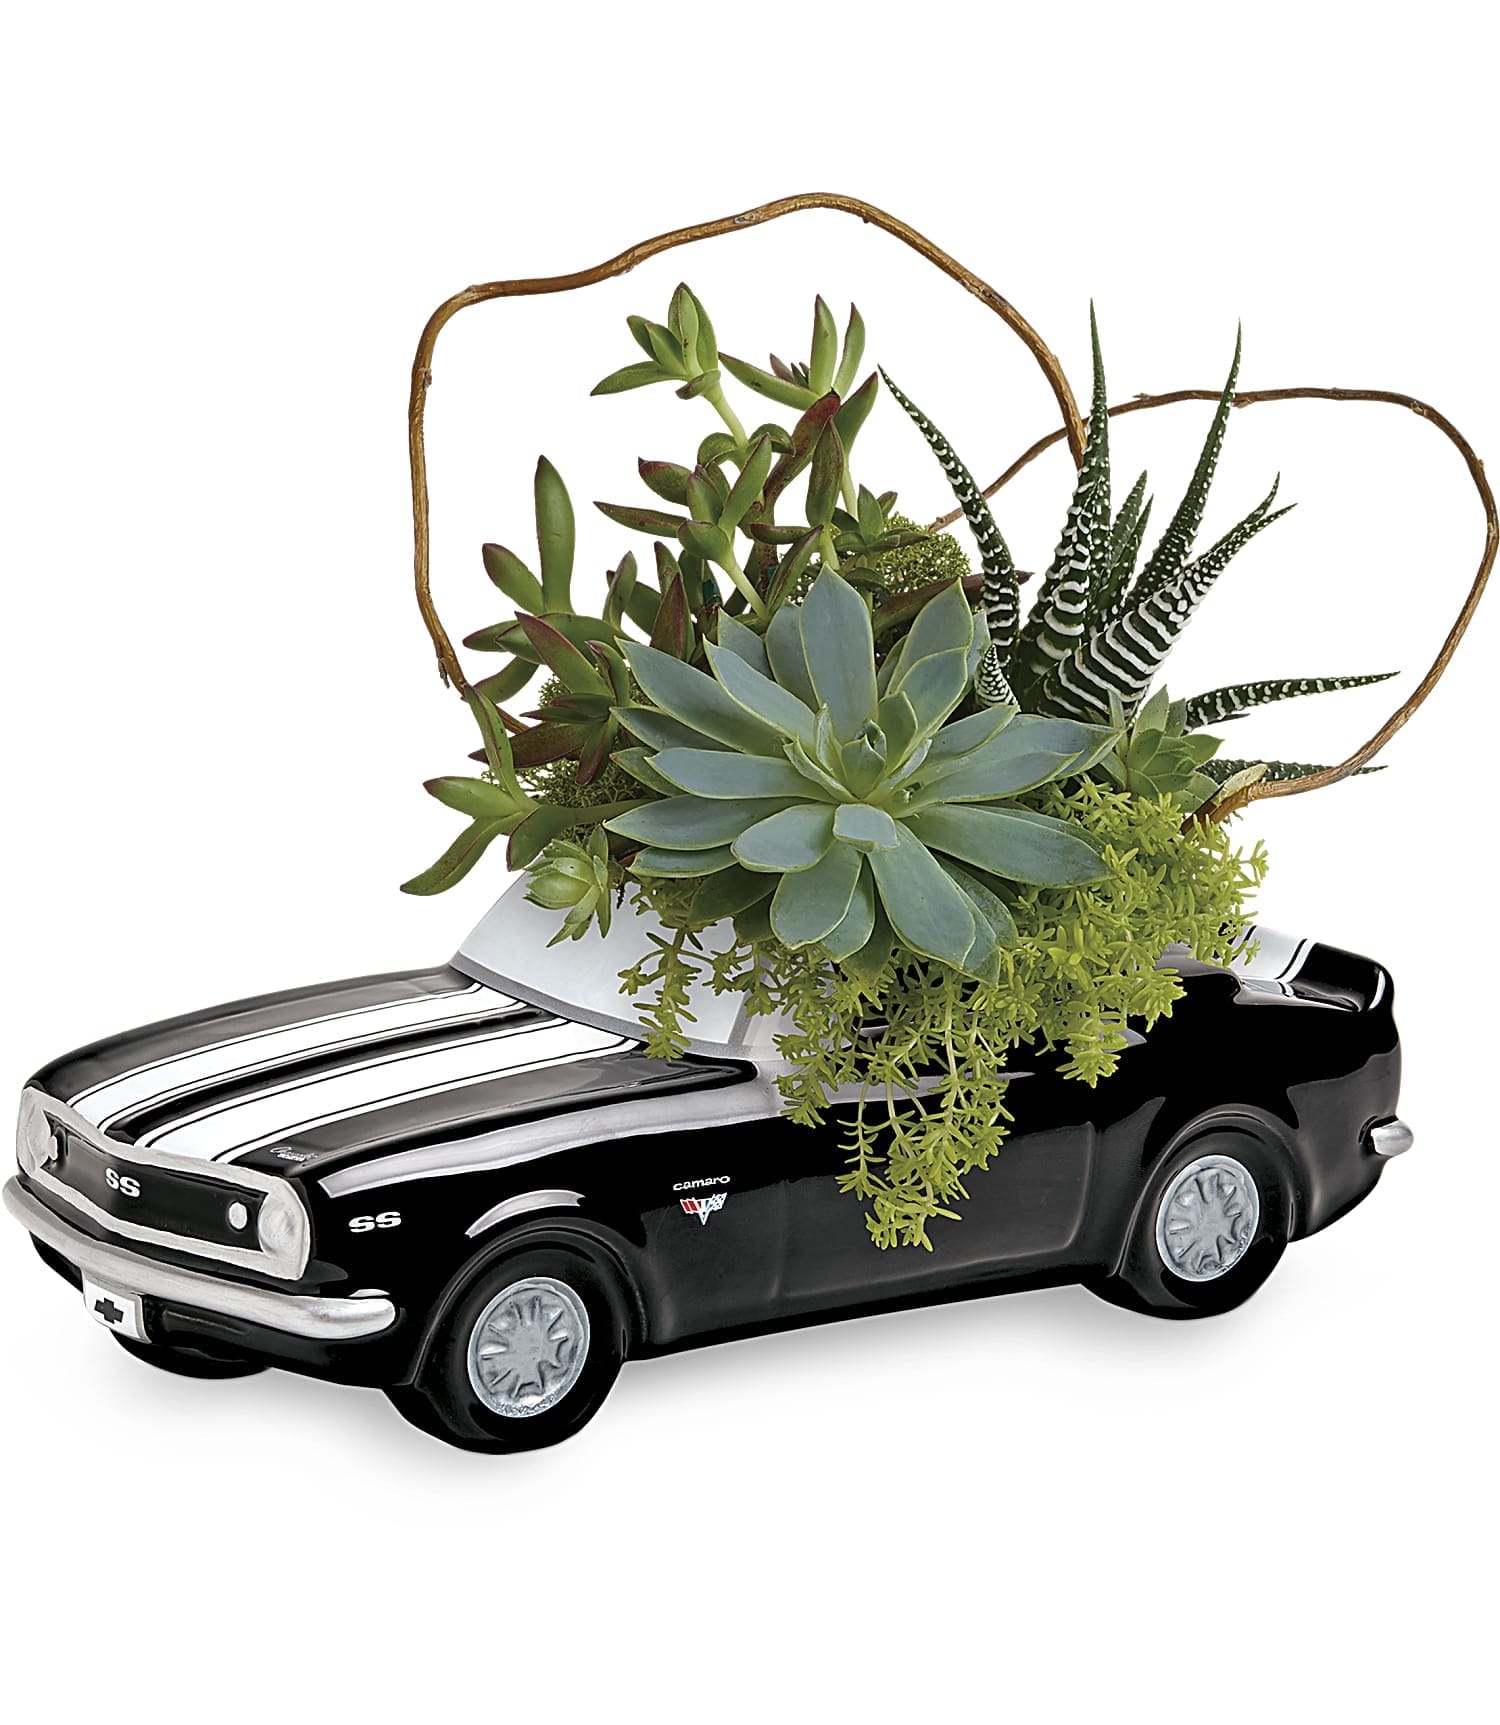 '67 Chevy Camaro Plant Garden - Speed into Father's Day with a gift that's sure to get his engines going! Dad will love this vintage ceramic Chevy Camaro, bursting with beautiful succulents.  This growing garden includes curly willow, green sedum succulent, large echeveria succulent, golden moss fern, and zebra haworthia. Delivered in a '67 Chevy Camaro keepsake. Approximately 11&quot; W x 8 1/2&quot; H